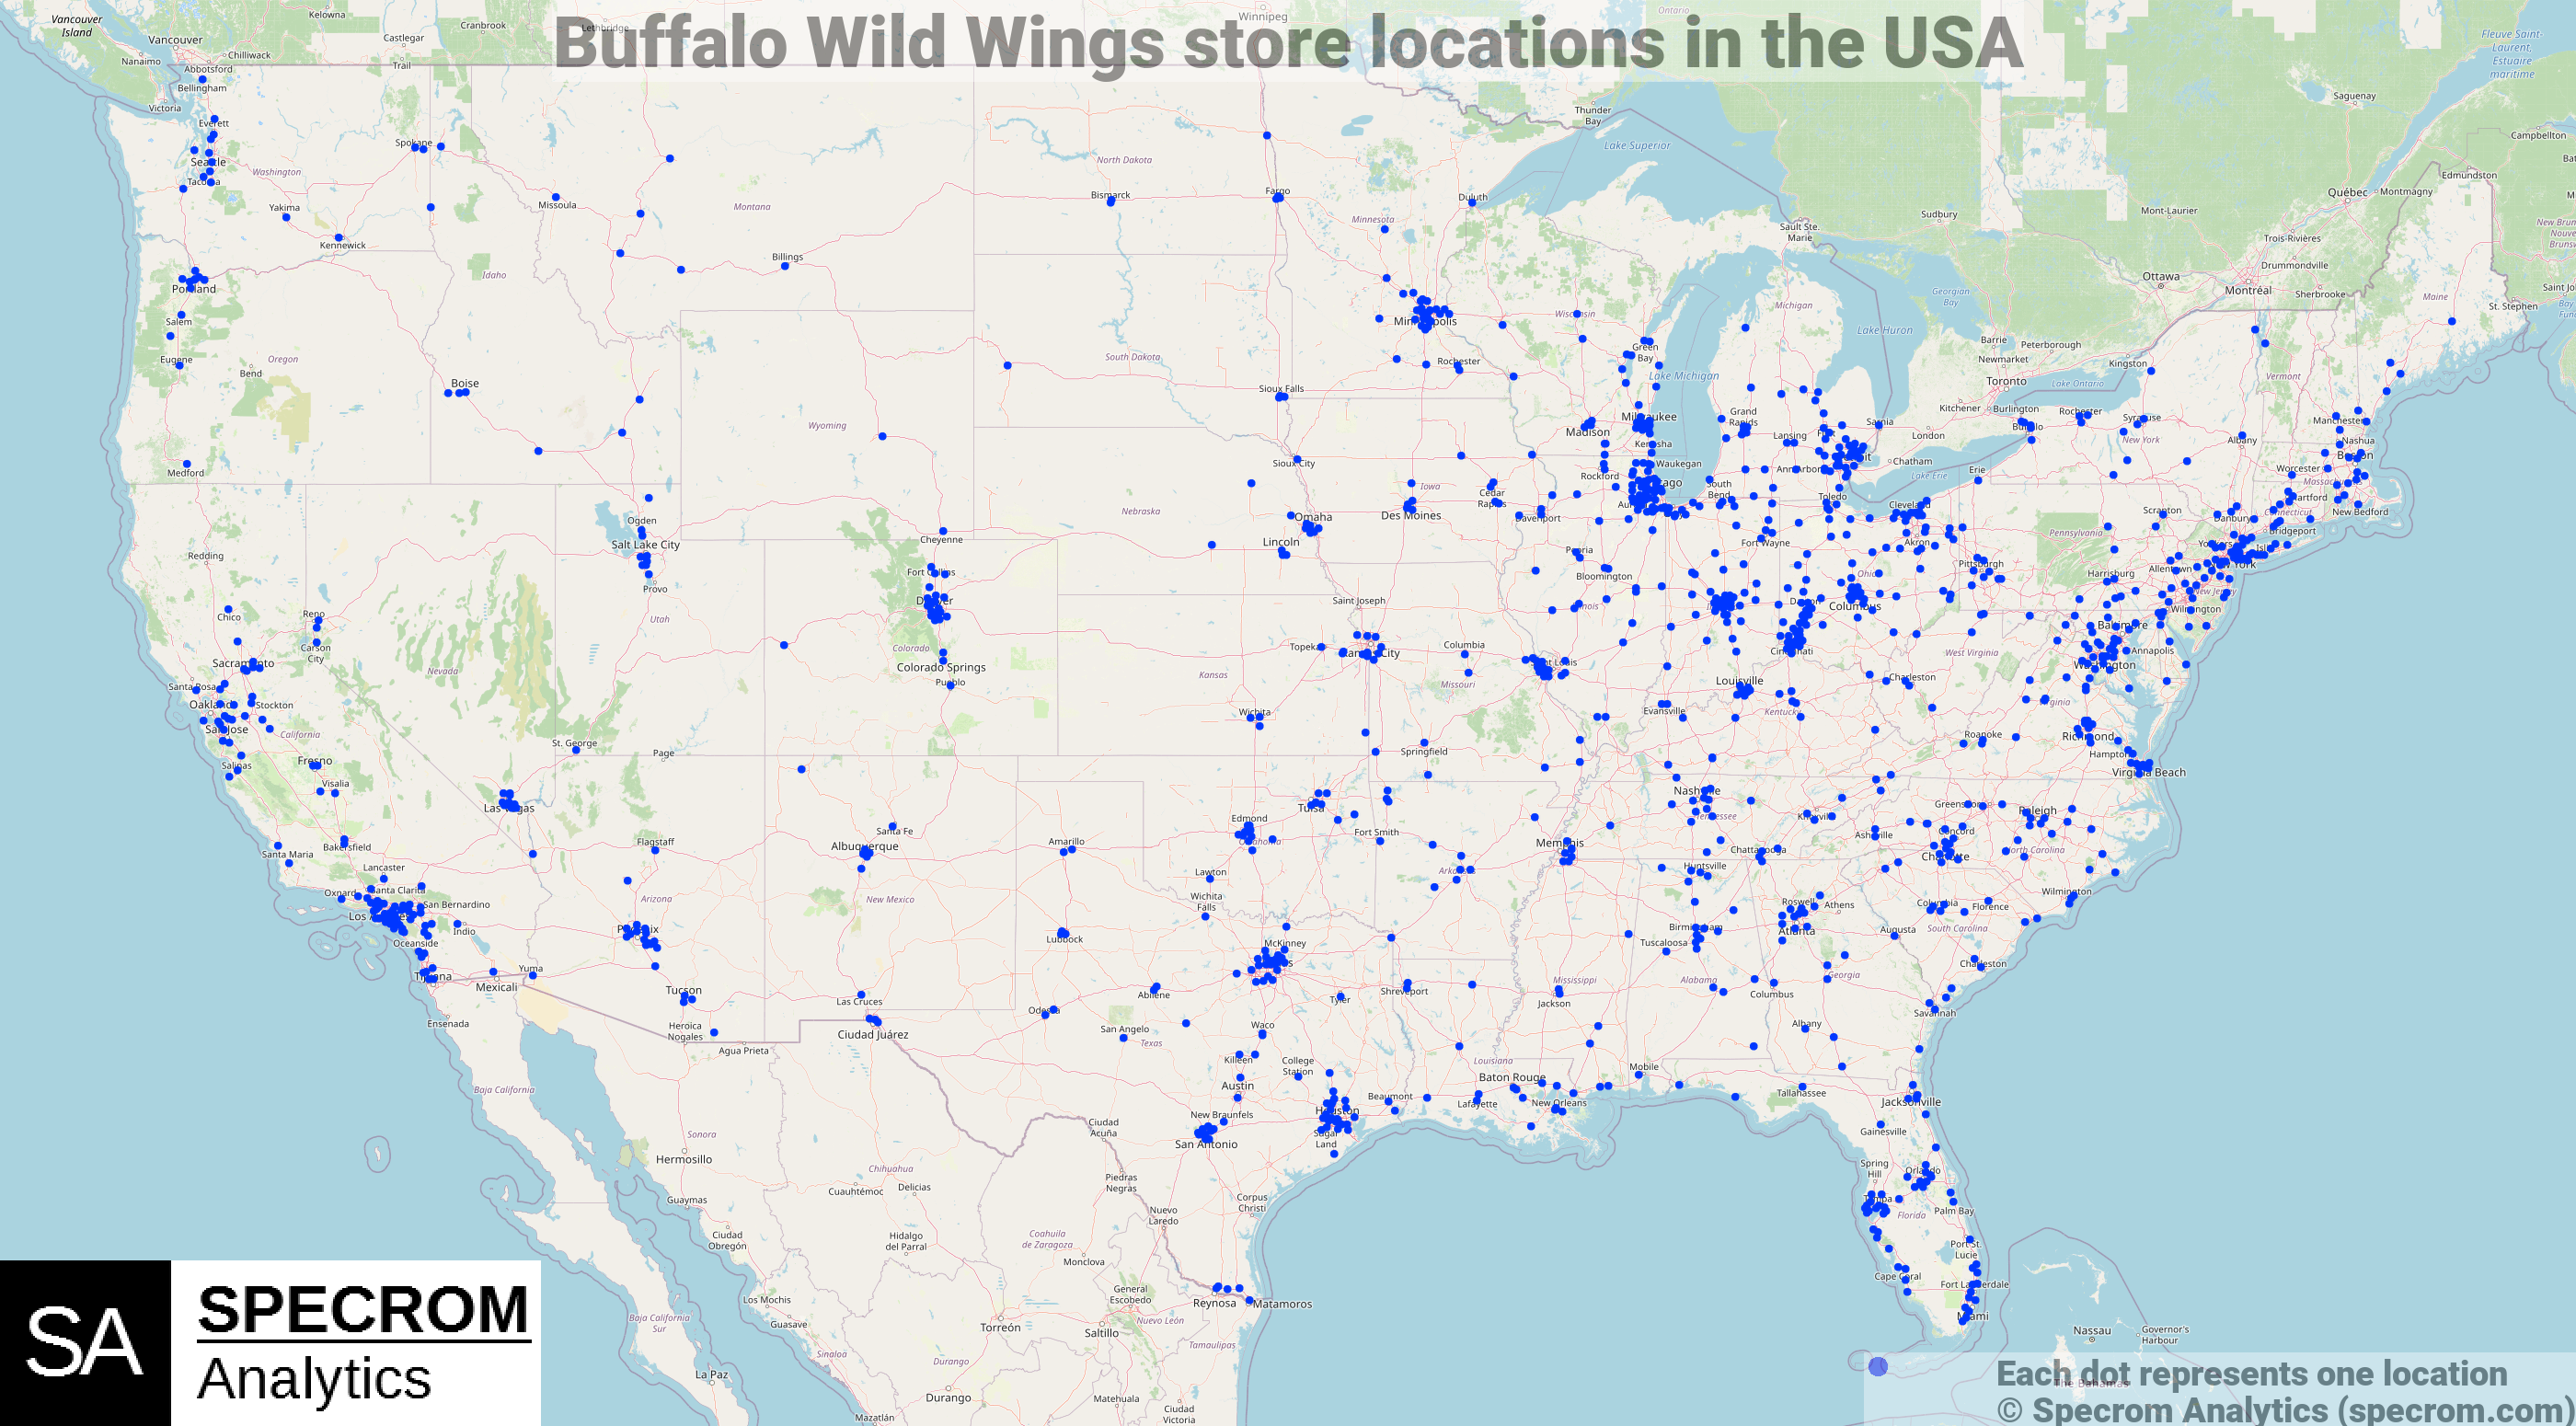 Buffalo Wild Wings store locations in the USA